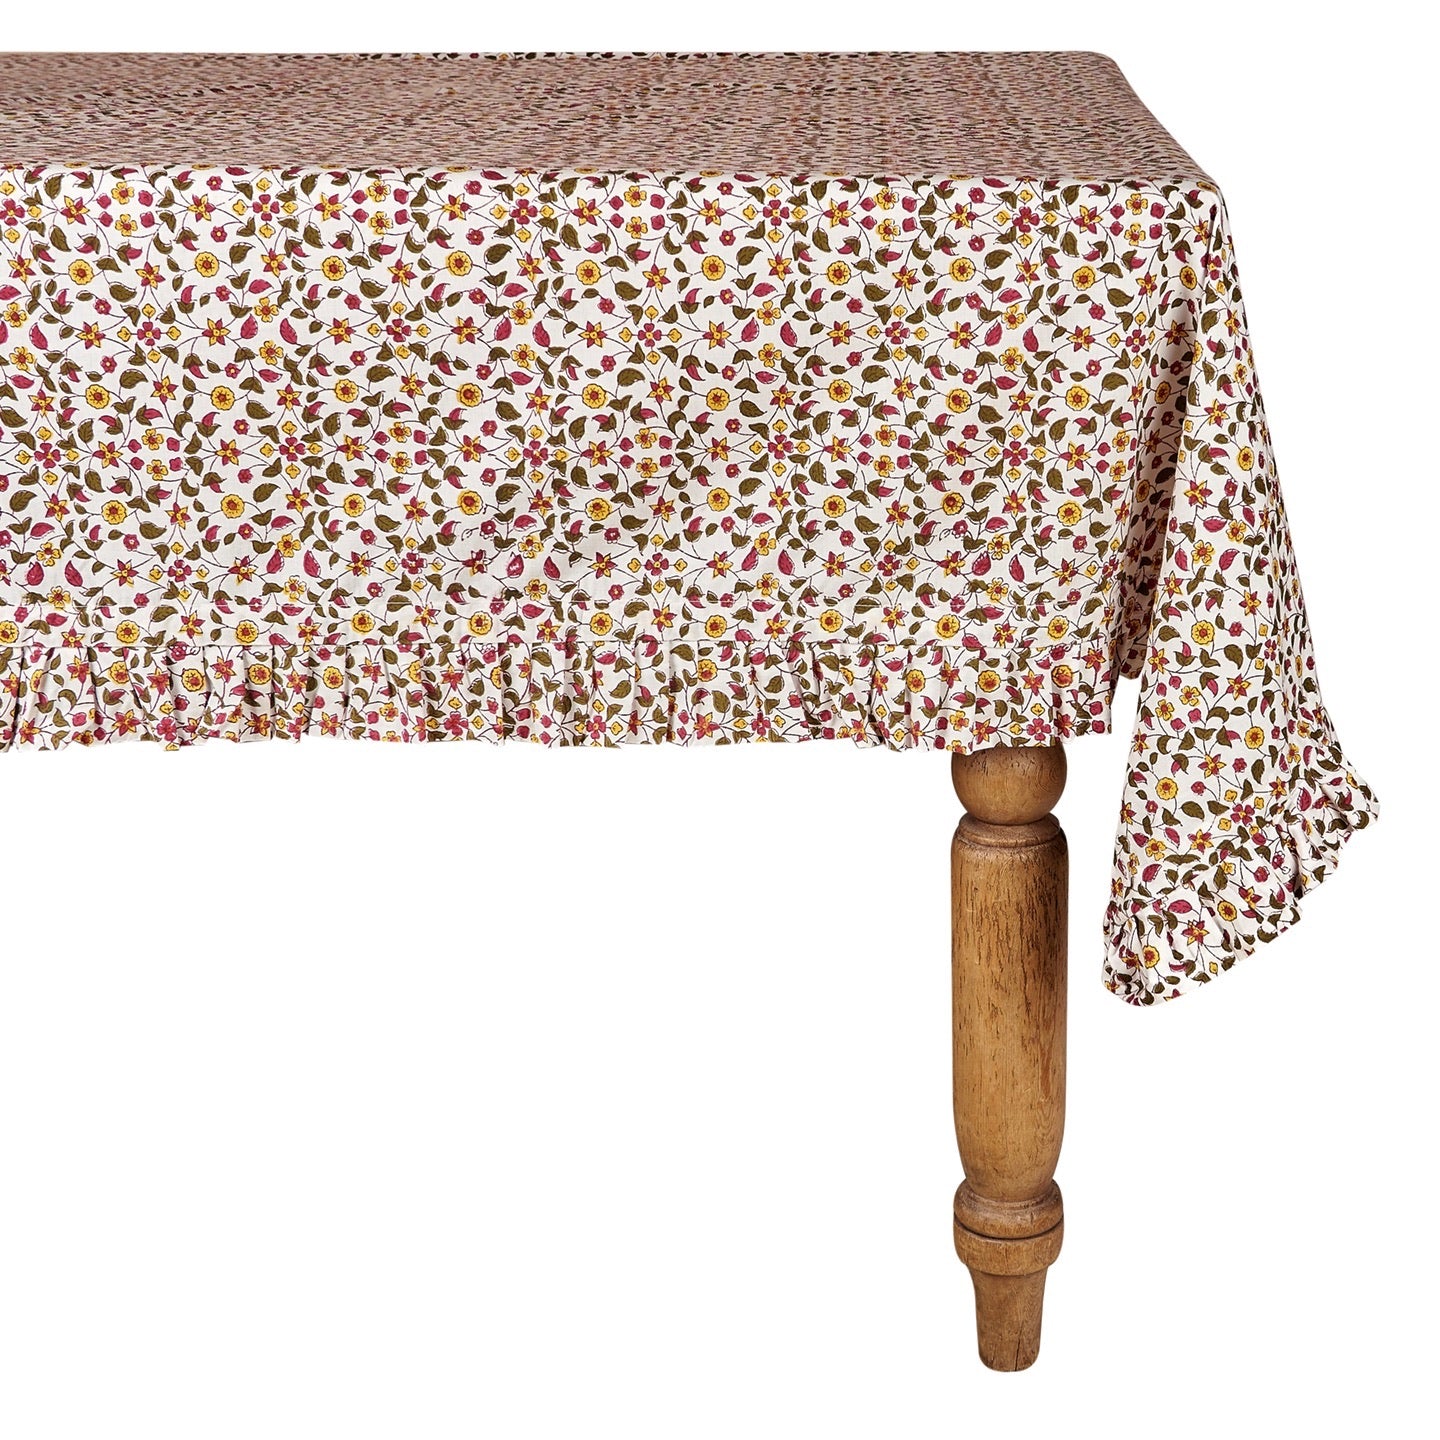 Multi-Coloured Ditsy Floral Cotton Tablecloth